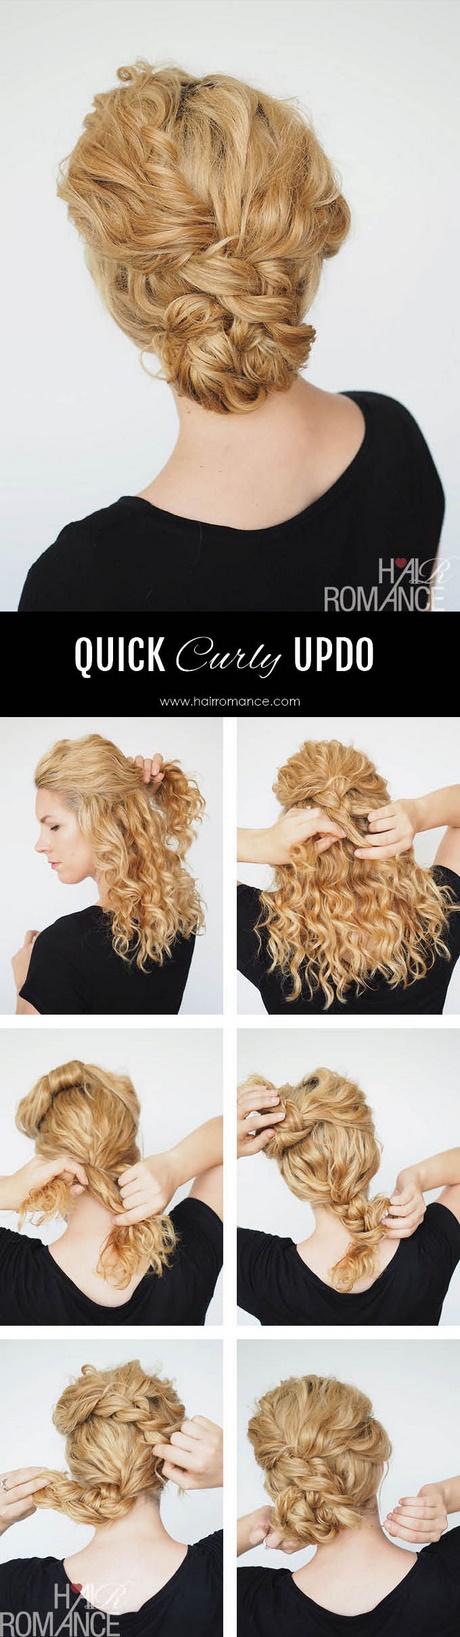 Quick easy updos for thick hair quick-easy-updos-for-thick-hair-24_4